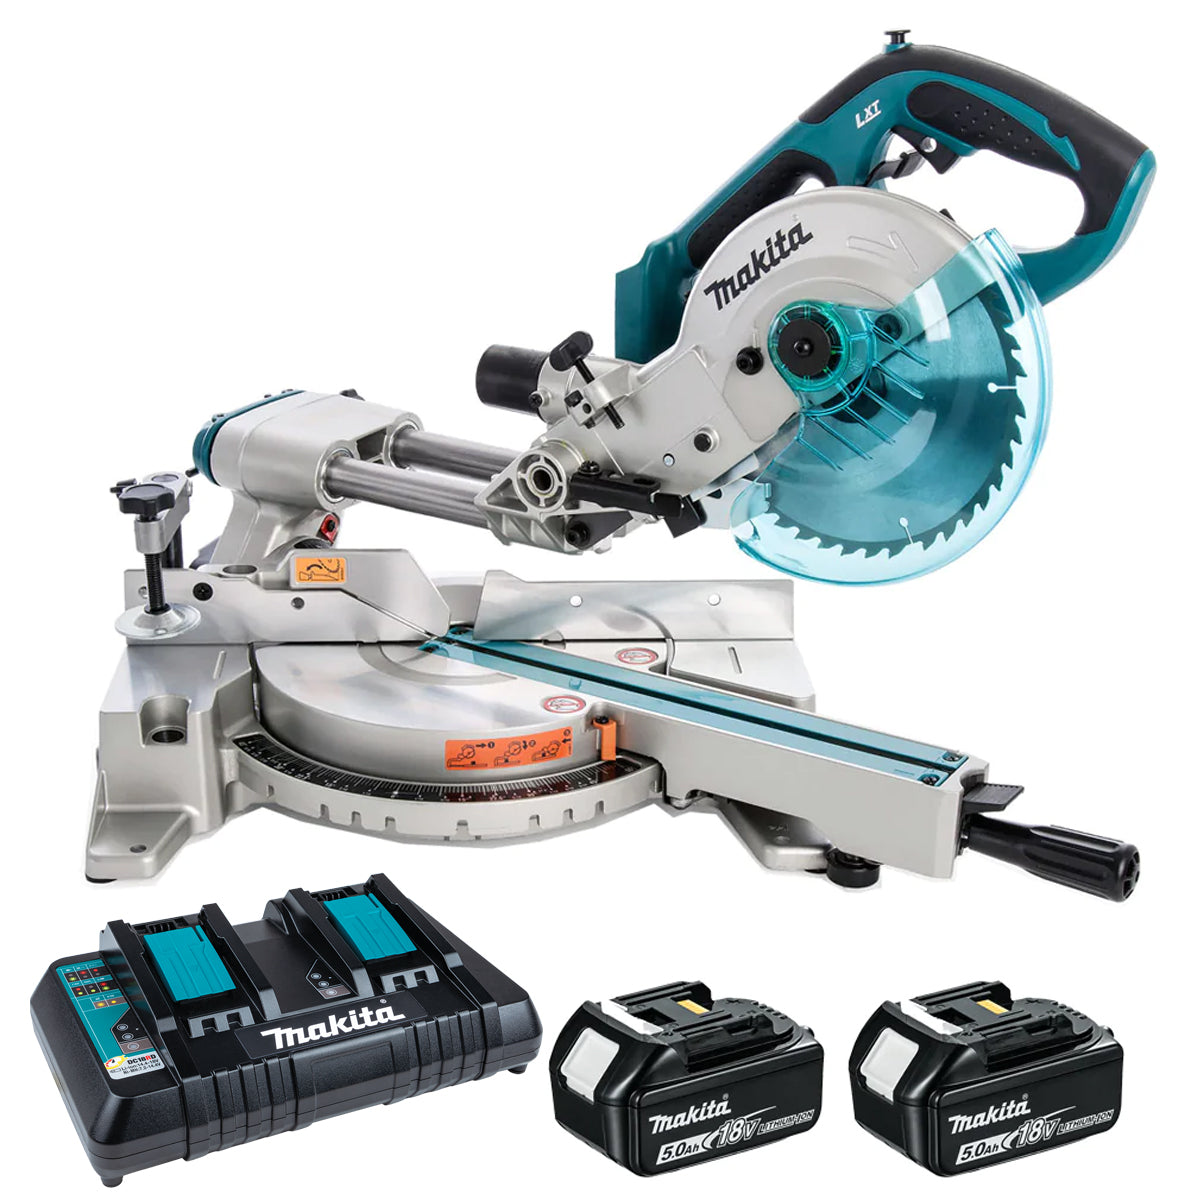 Makita DLS713Z 18V 190mm Slide Compound Mitre Saw with 2 x 5.0Ah Batteries & Charger